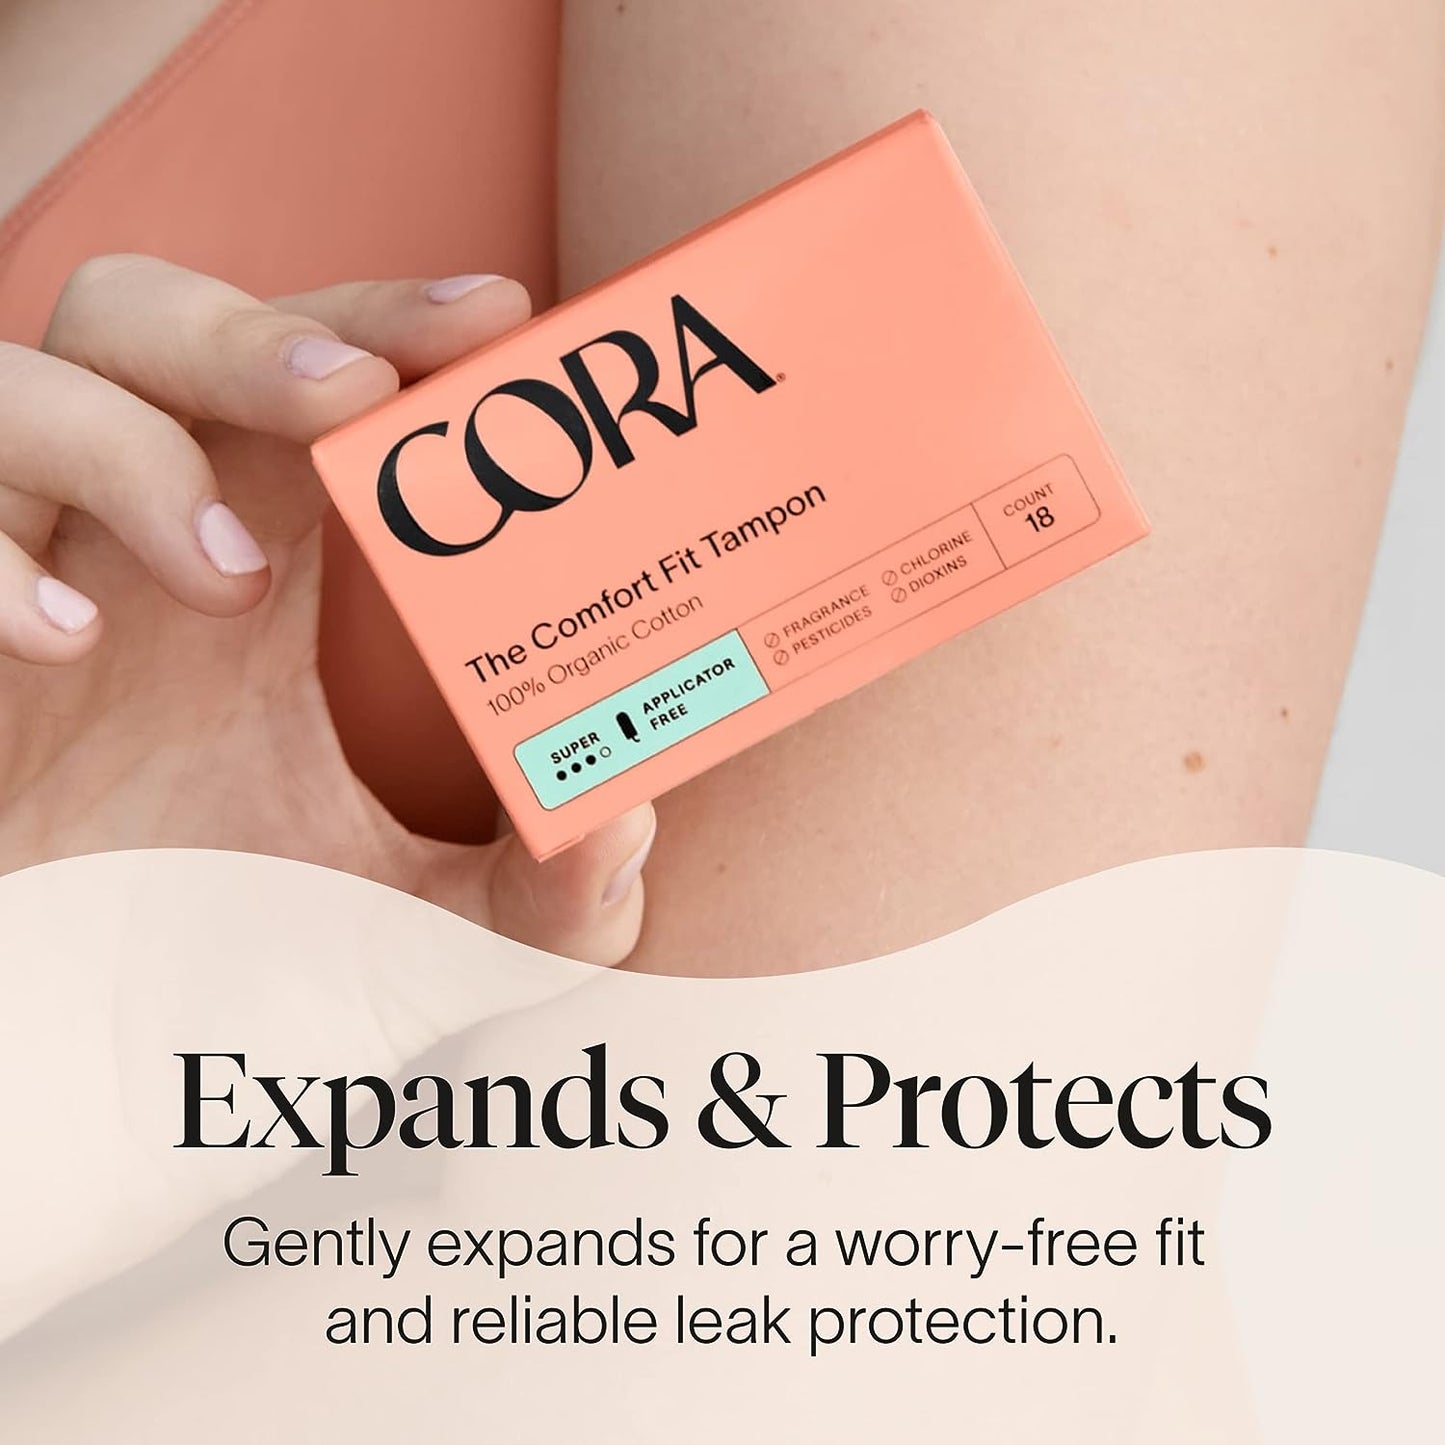 Cora 100% Organic Cotton Non-Applicator Tampons | Ultra-Absorbent, Unscented, Natural, Non-Toxic, Applicator Free | Eco-Conscious (36 S/S+ Tampons) - Premium Tampons from Concordia Style Boutique - Just $21.17! Shop now at Concordia Style Boutique